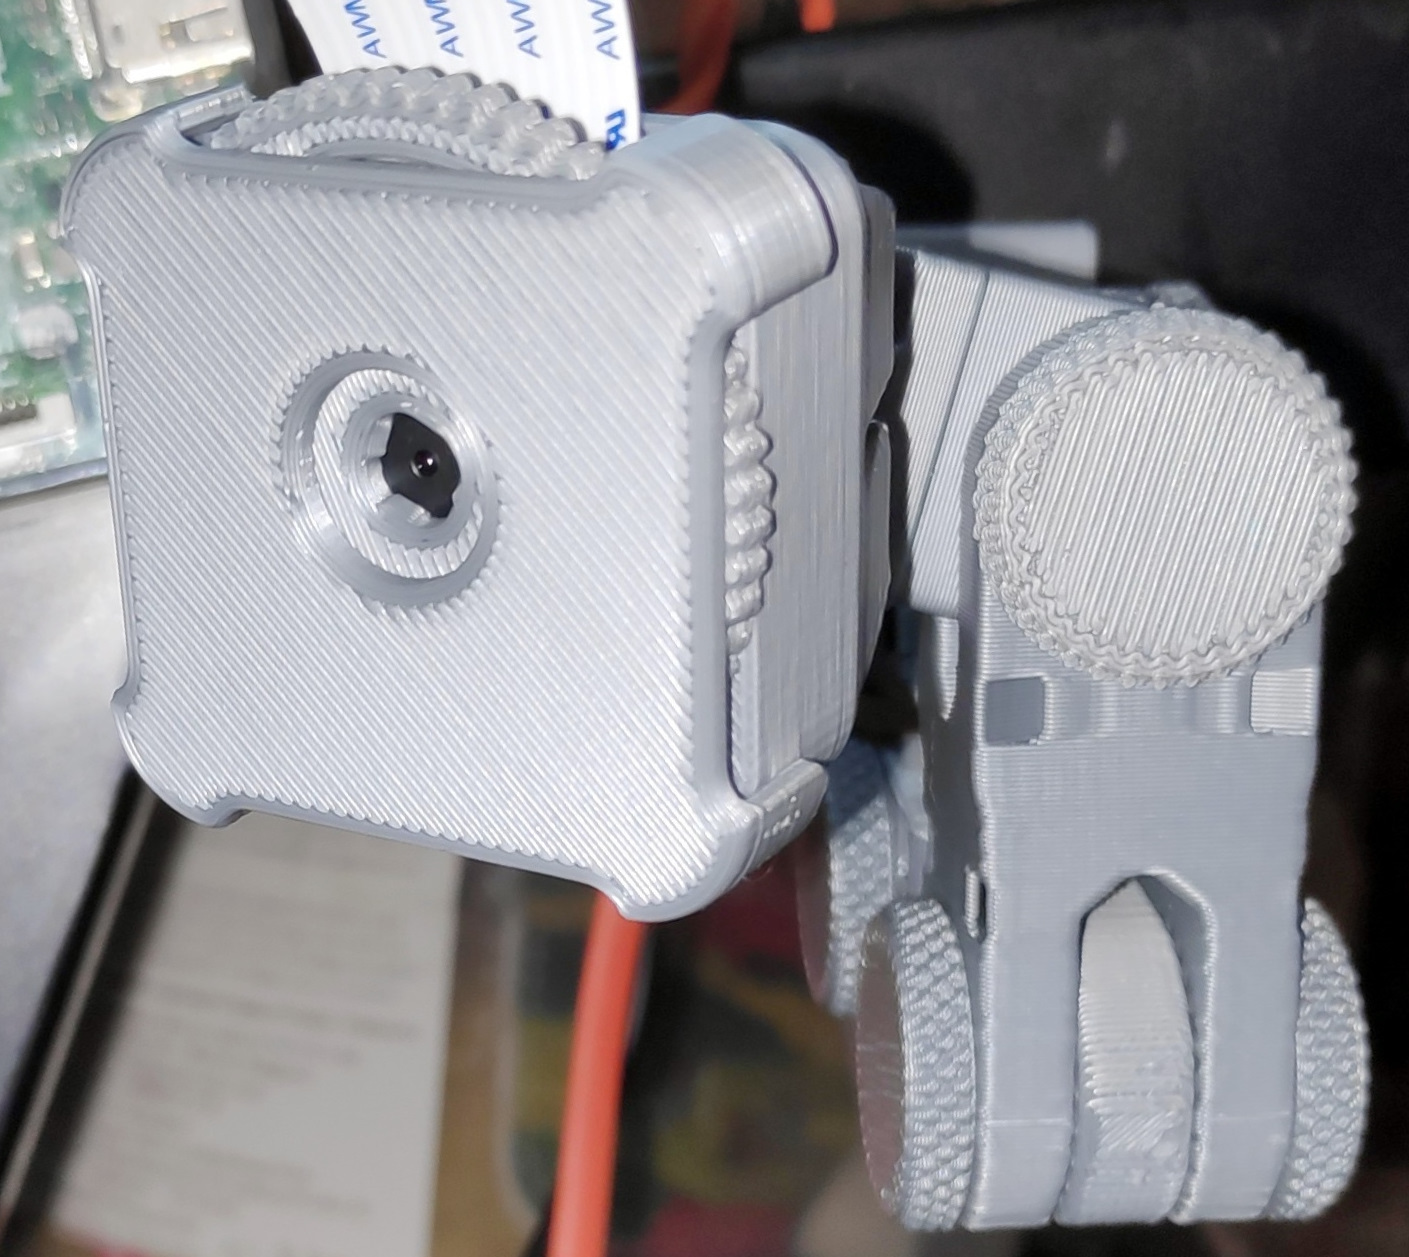 Housing for the Raspberry Pi standard camera module v2.1 with integrated focus adjustment